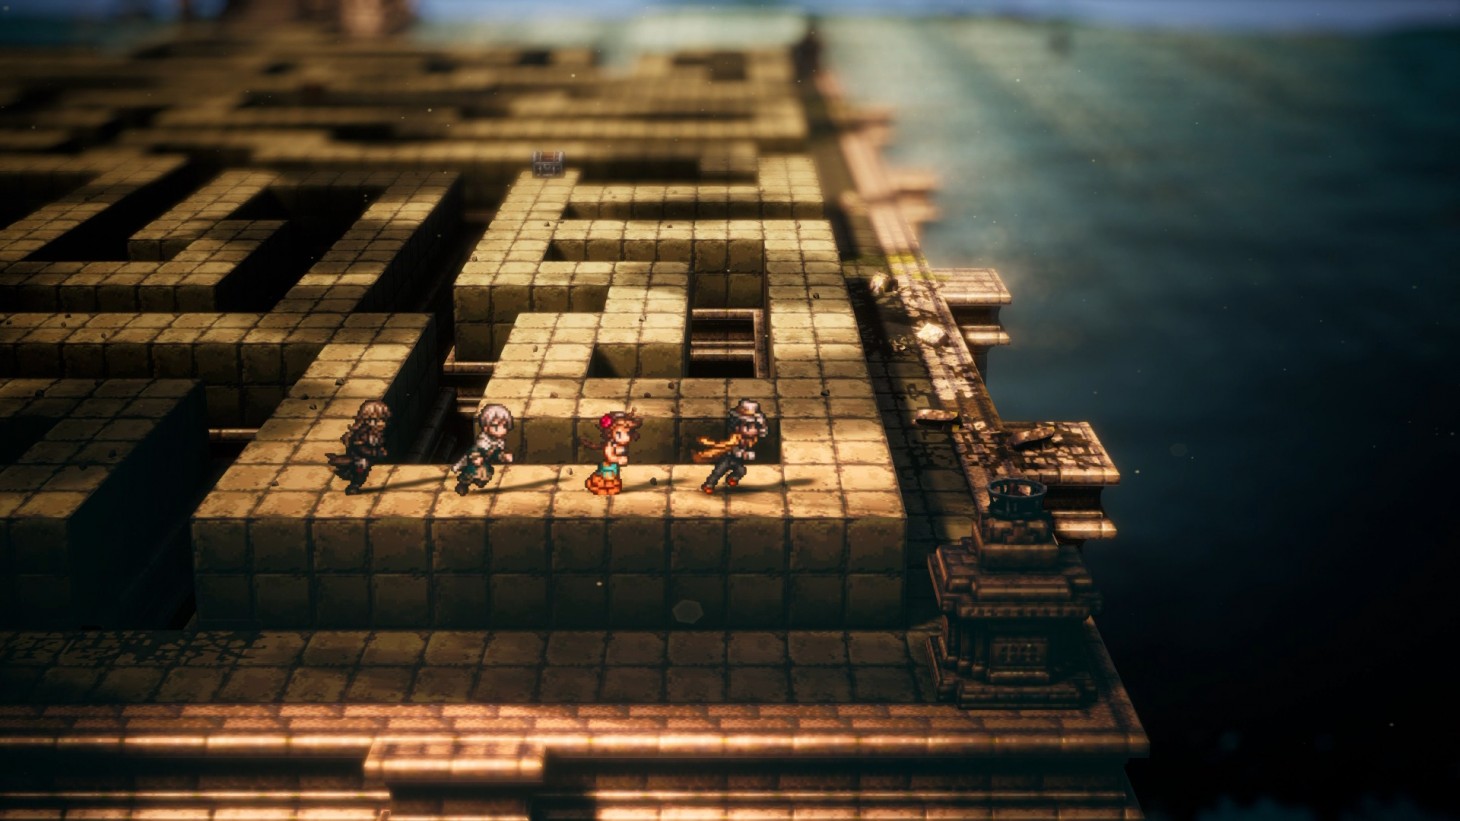 Octopath Traveler II Review (Switch)